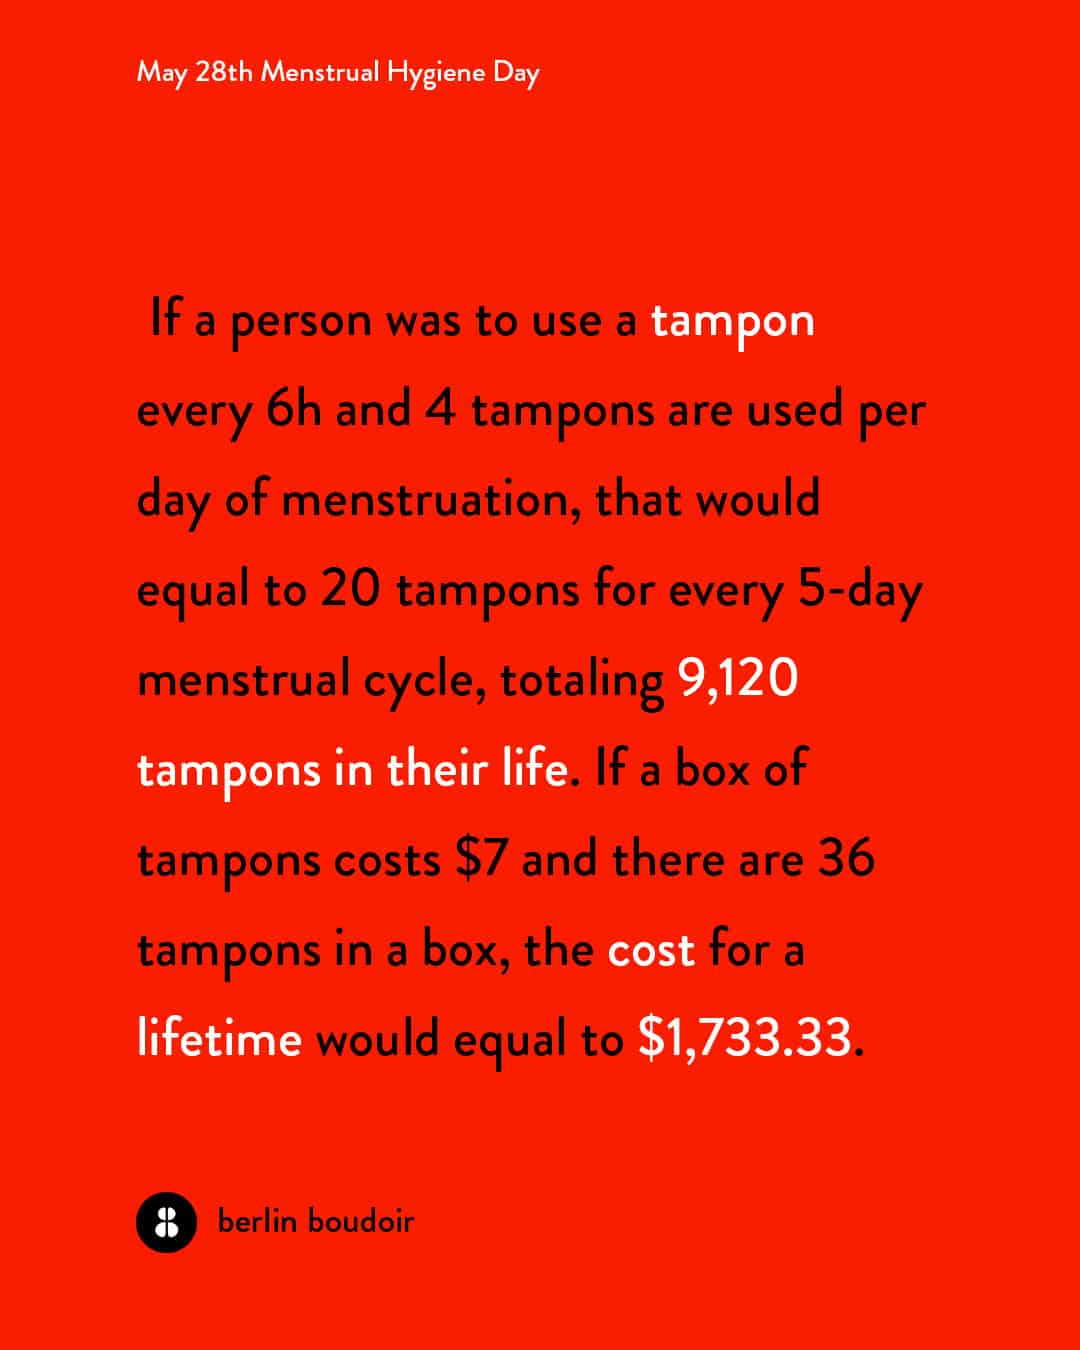  If a person was to use a tampon every 6h and 4 tampons are used per day of menstruation, that would equal to 20 tampons for every 5-day menstrual cycle, totaling 9,120 tampons in their life. If a box of tampons costs $7 and there are 36 tampons in a box, the cost for a lifetime would equal to $1,733.33.